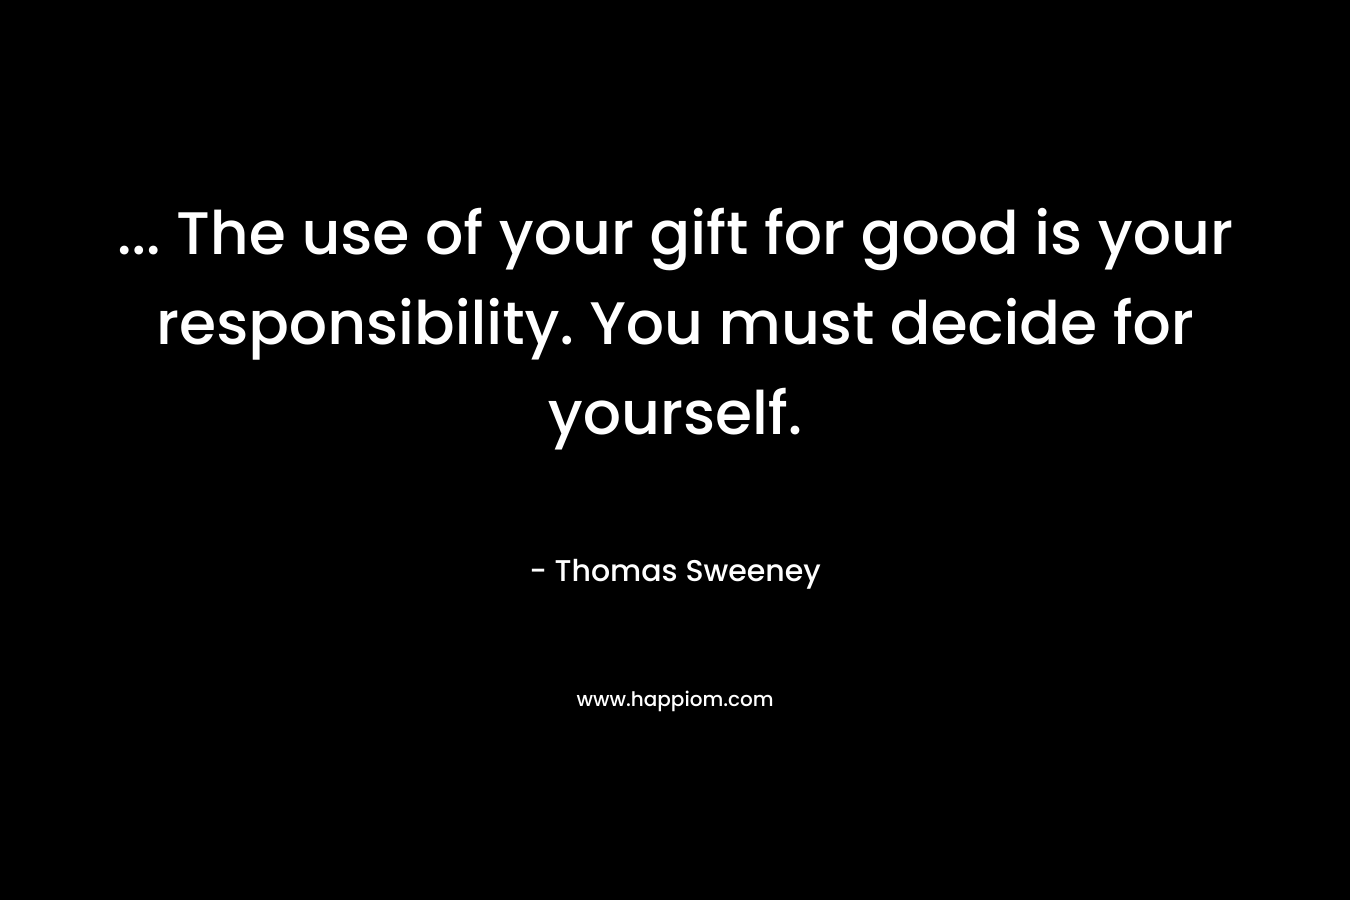 ... The use of your gift for good is your responsibility. You must decide for yourself.